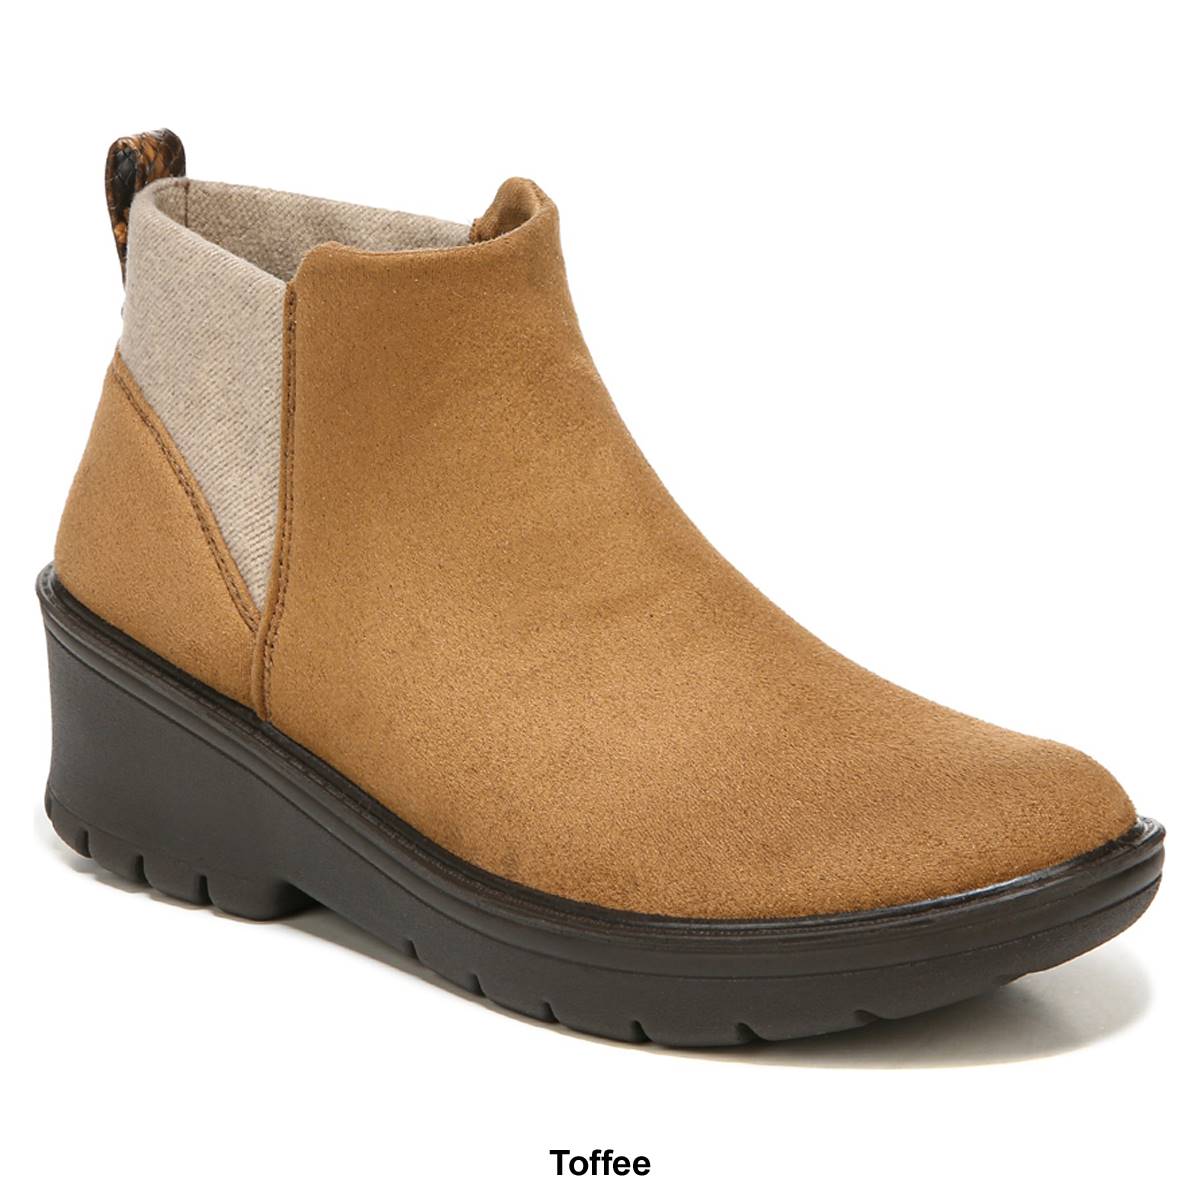 Womens BZees Boston Ankle Boots